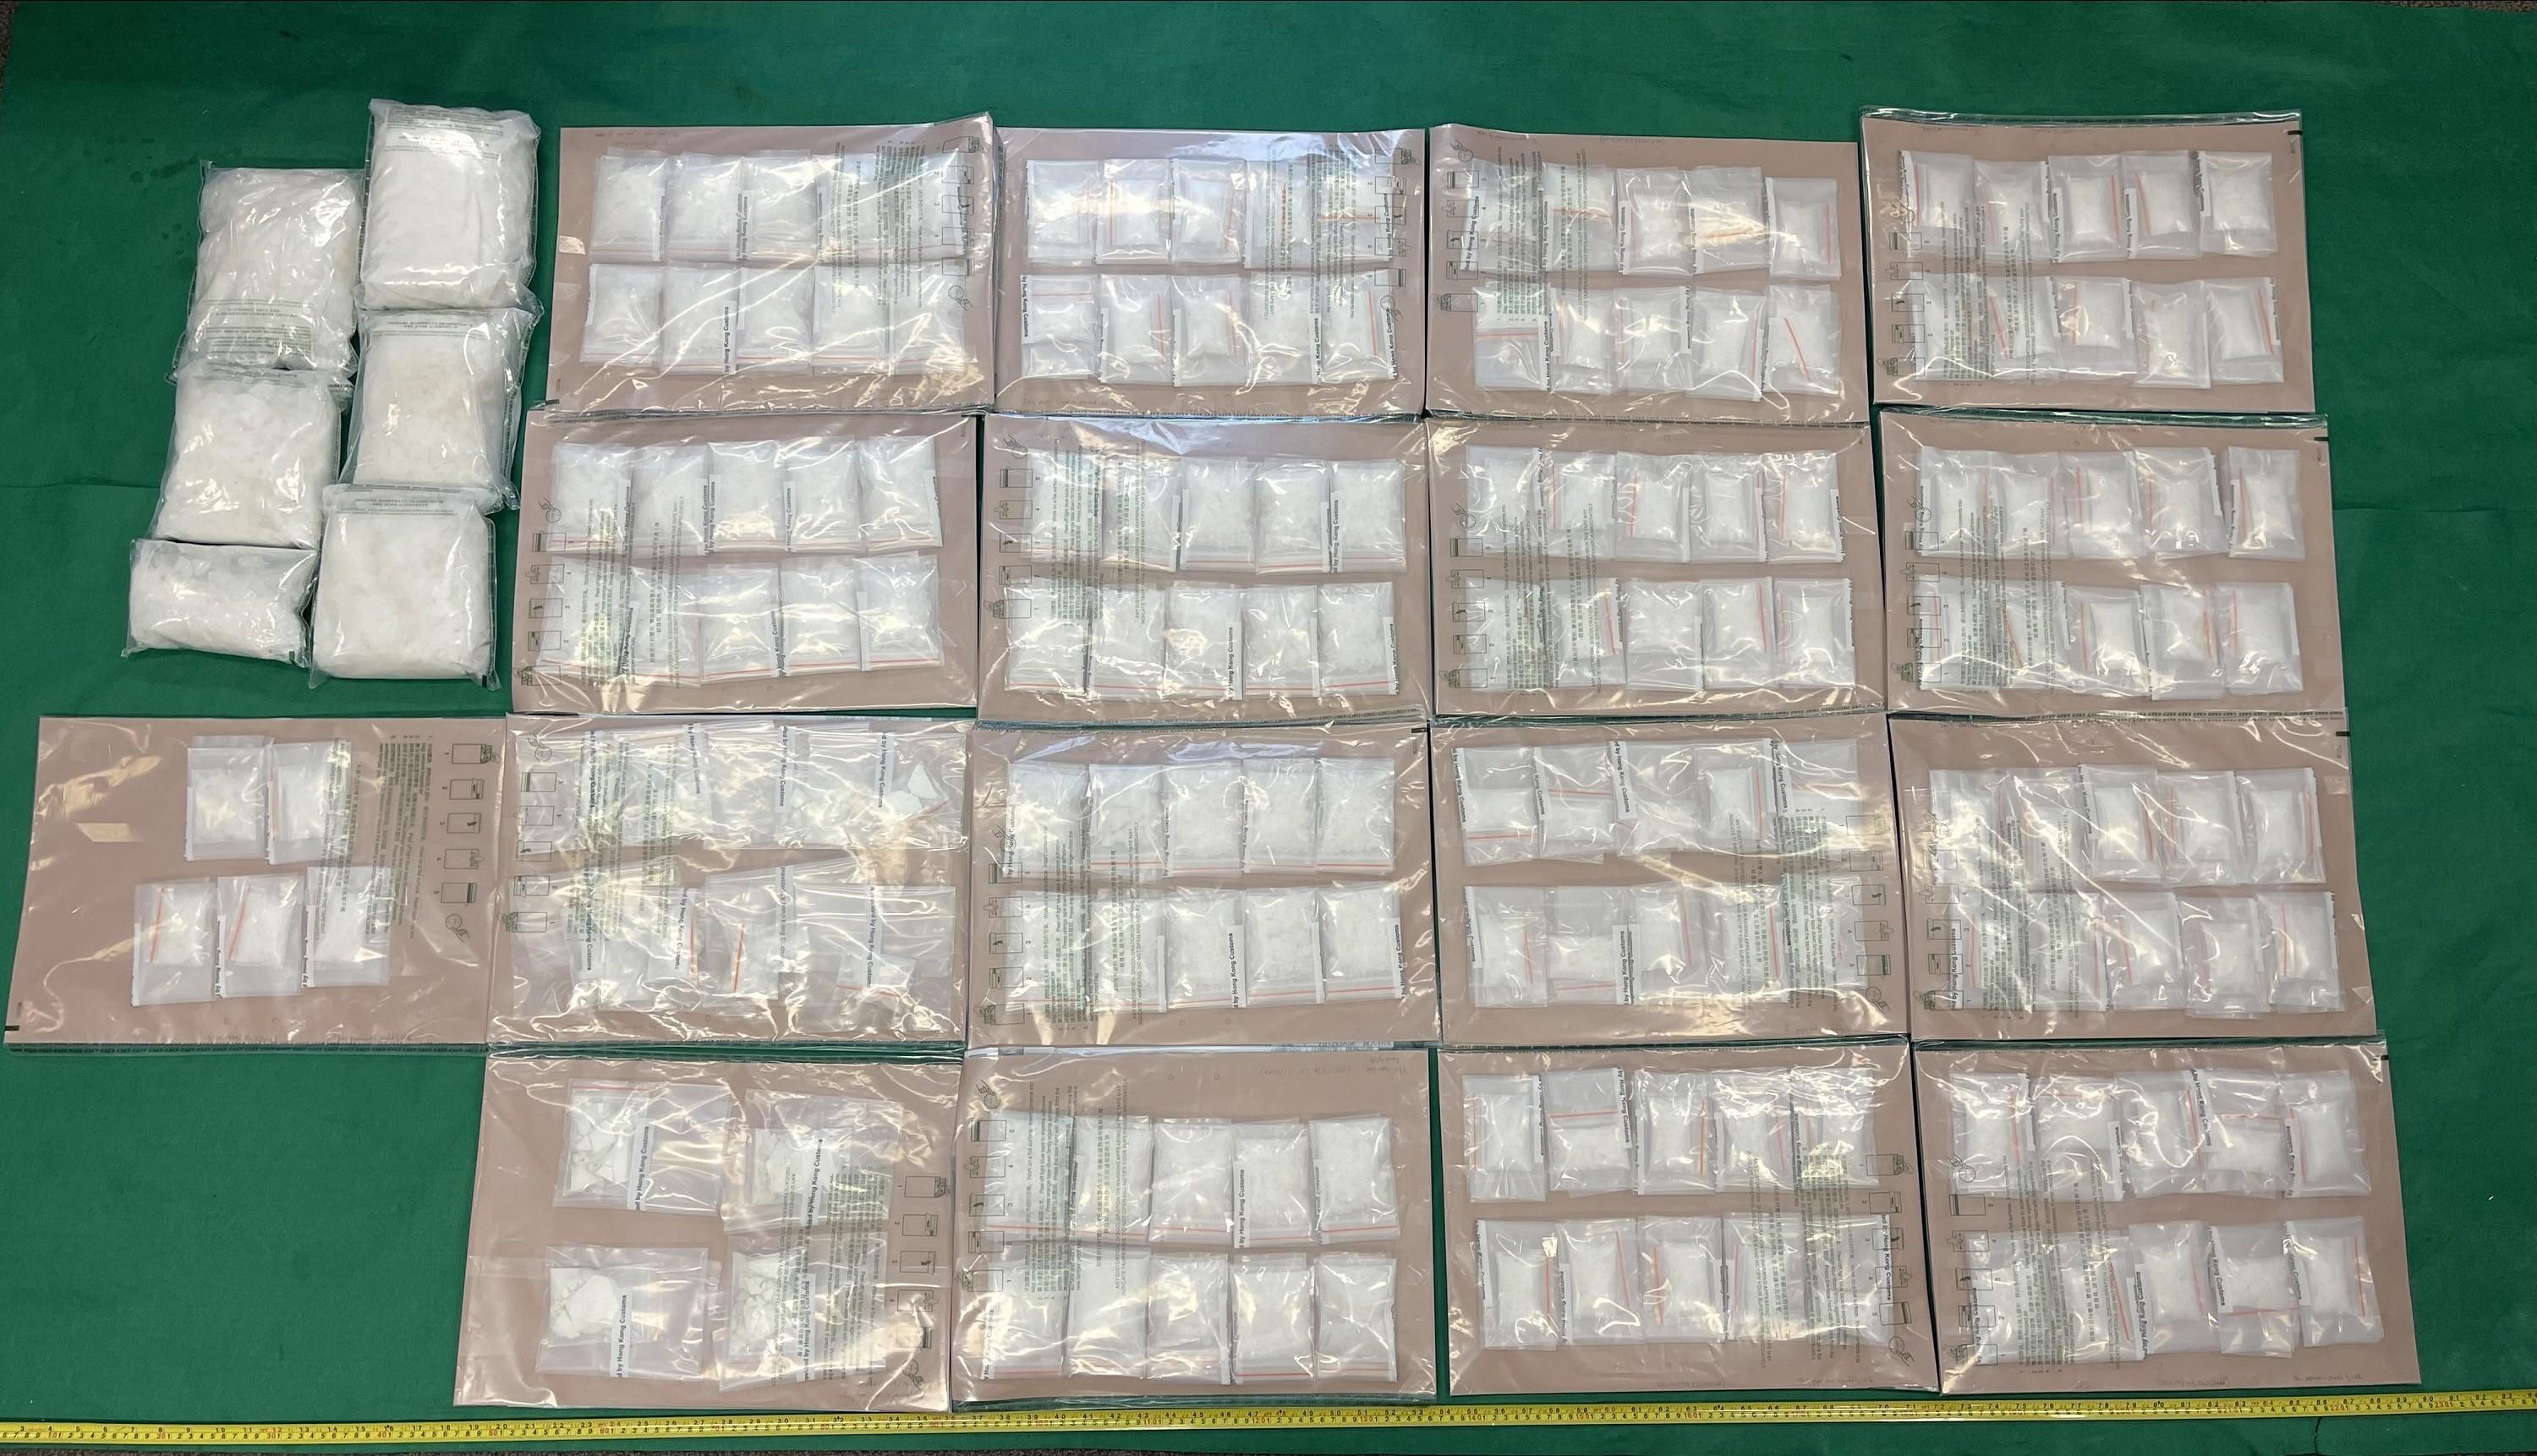 Hong Kong Customs seized about 5 kilograms of suspected methamphetamine at the Shenzhen Bay Control Point on April 18, and about 3.5kg of suspected methamphetamine and about 300 grams of suspected heroin at Quarry Bay yesterday (May 22). The total estimated market value was about $5.2 million. Photo shows the suspected methamphetamine and suspected heroin seized.